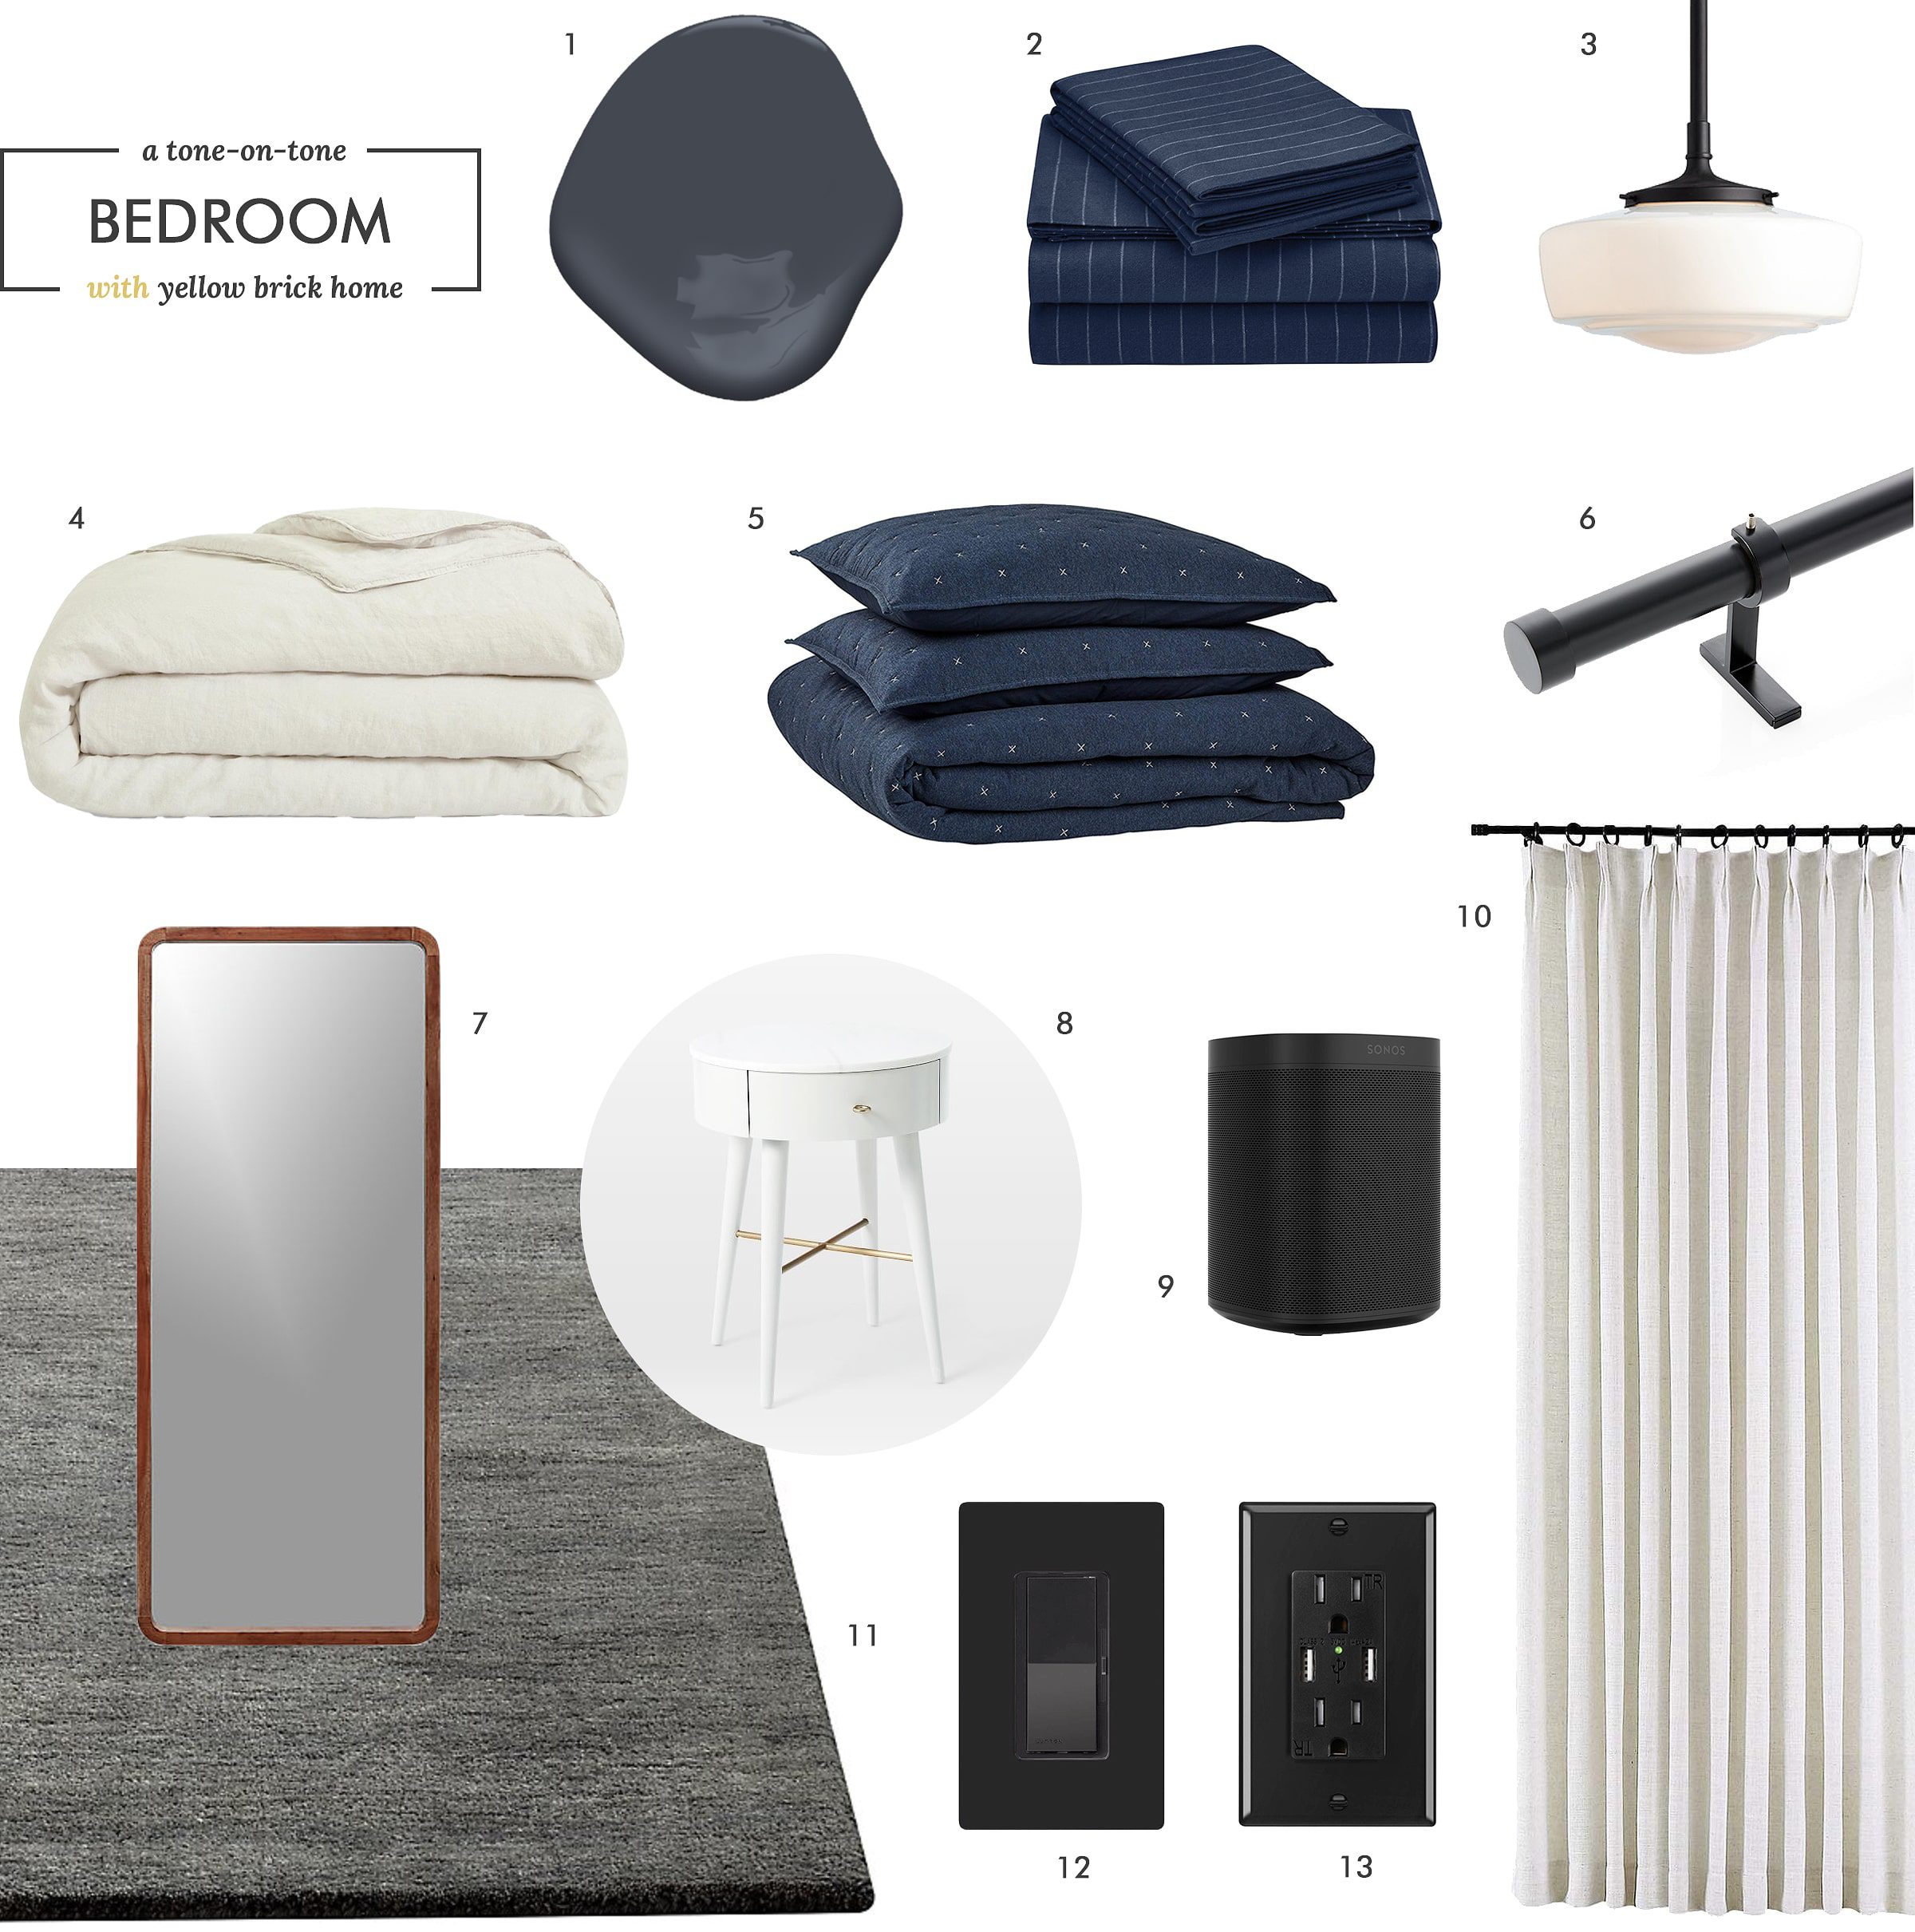 A mood board for a tone-on-tone moody bedroom makeover | via Yellow Brick Home